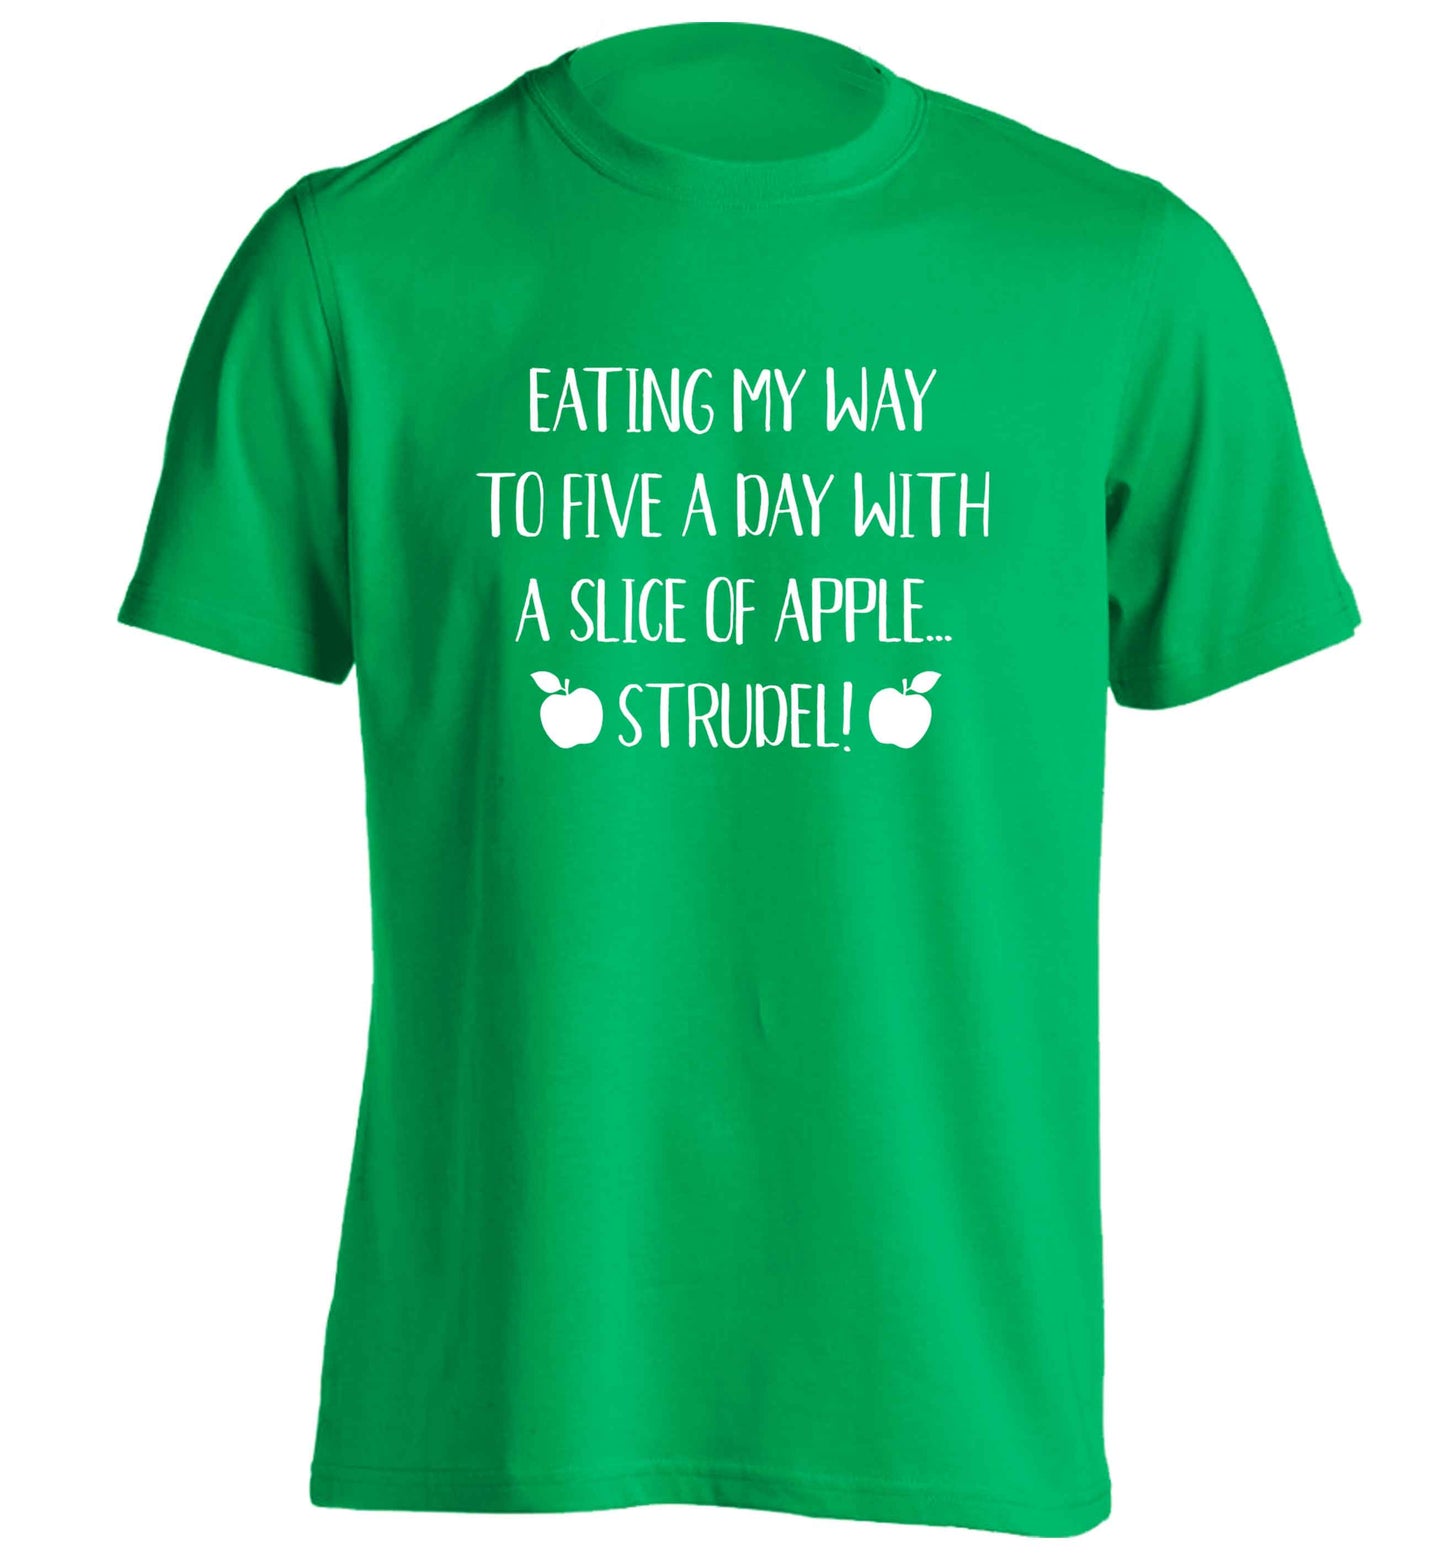 Eating my way to five a day with a slice of apple strudel adults unisex green Tshirt 2XL